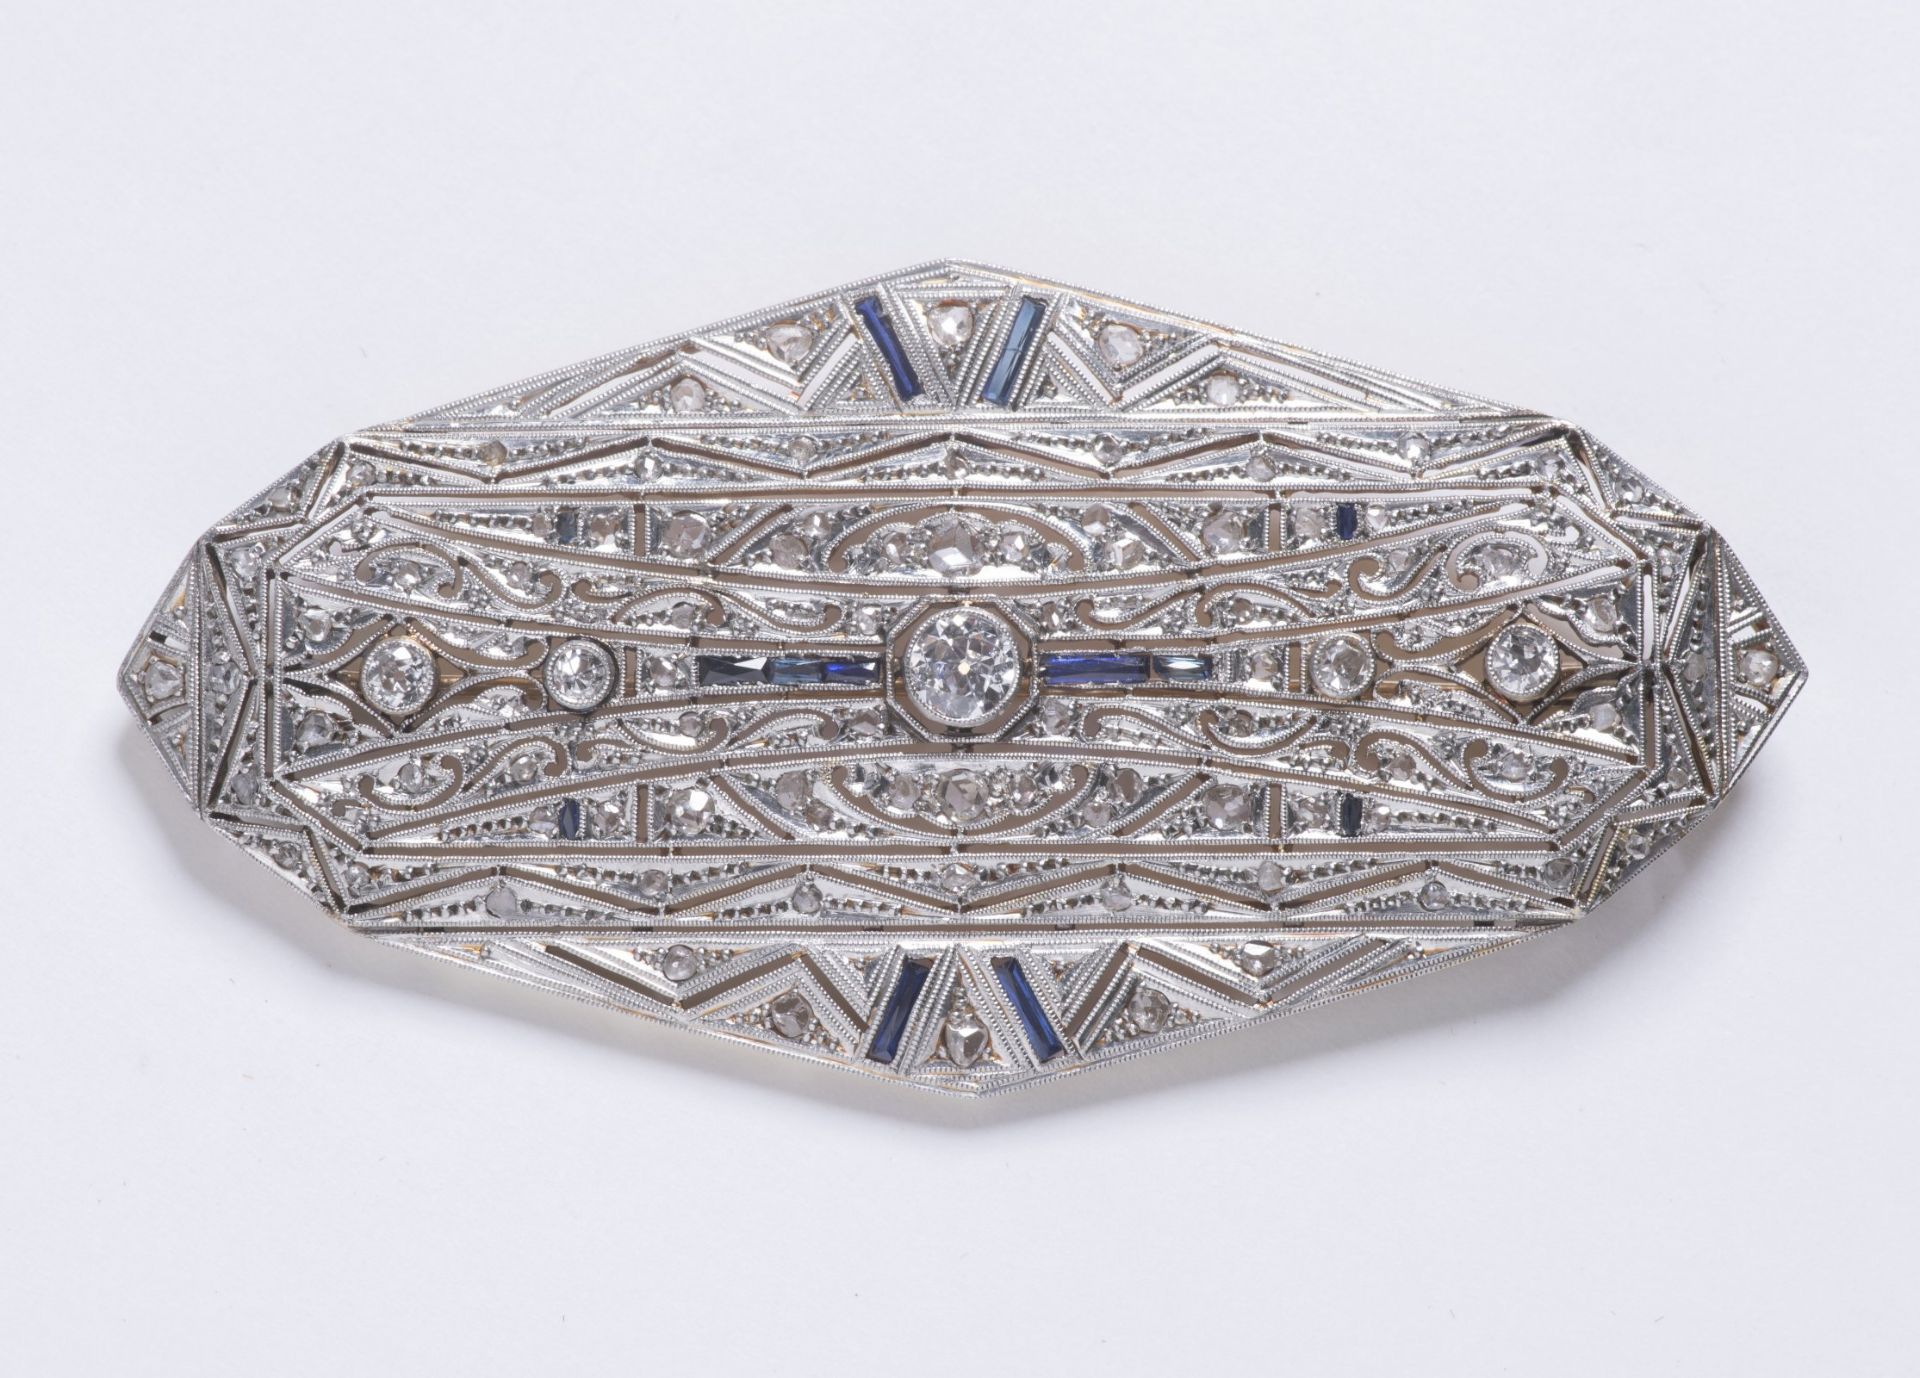 ART DECO BROOCH 1920 - 1930 France Yellow and white gold, diamonds, sapphires 3,7 x 7,5 cm, 21.24